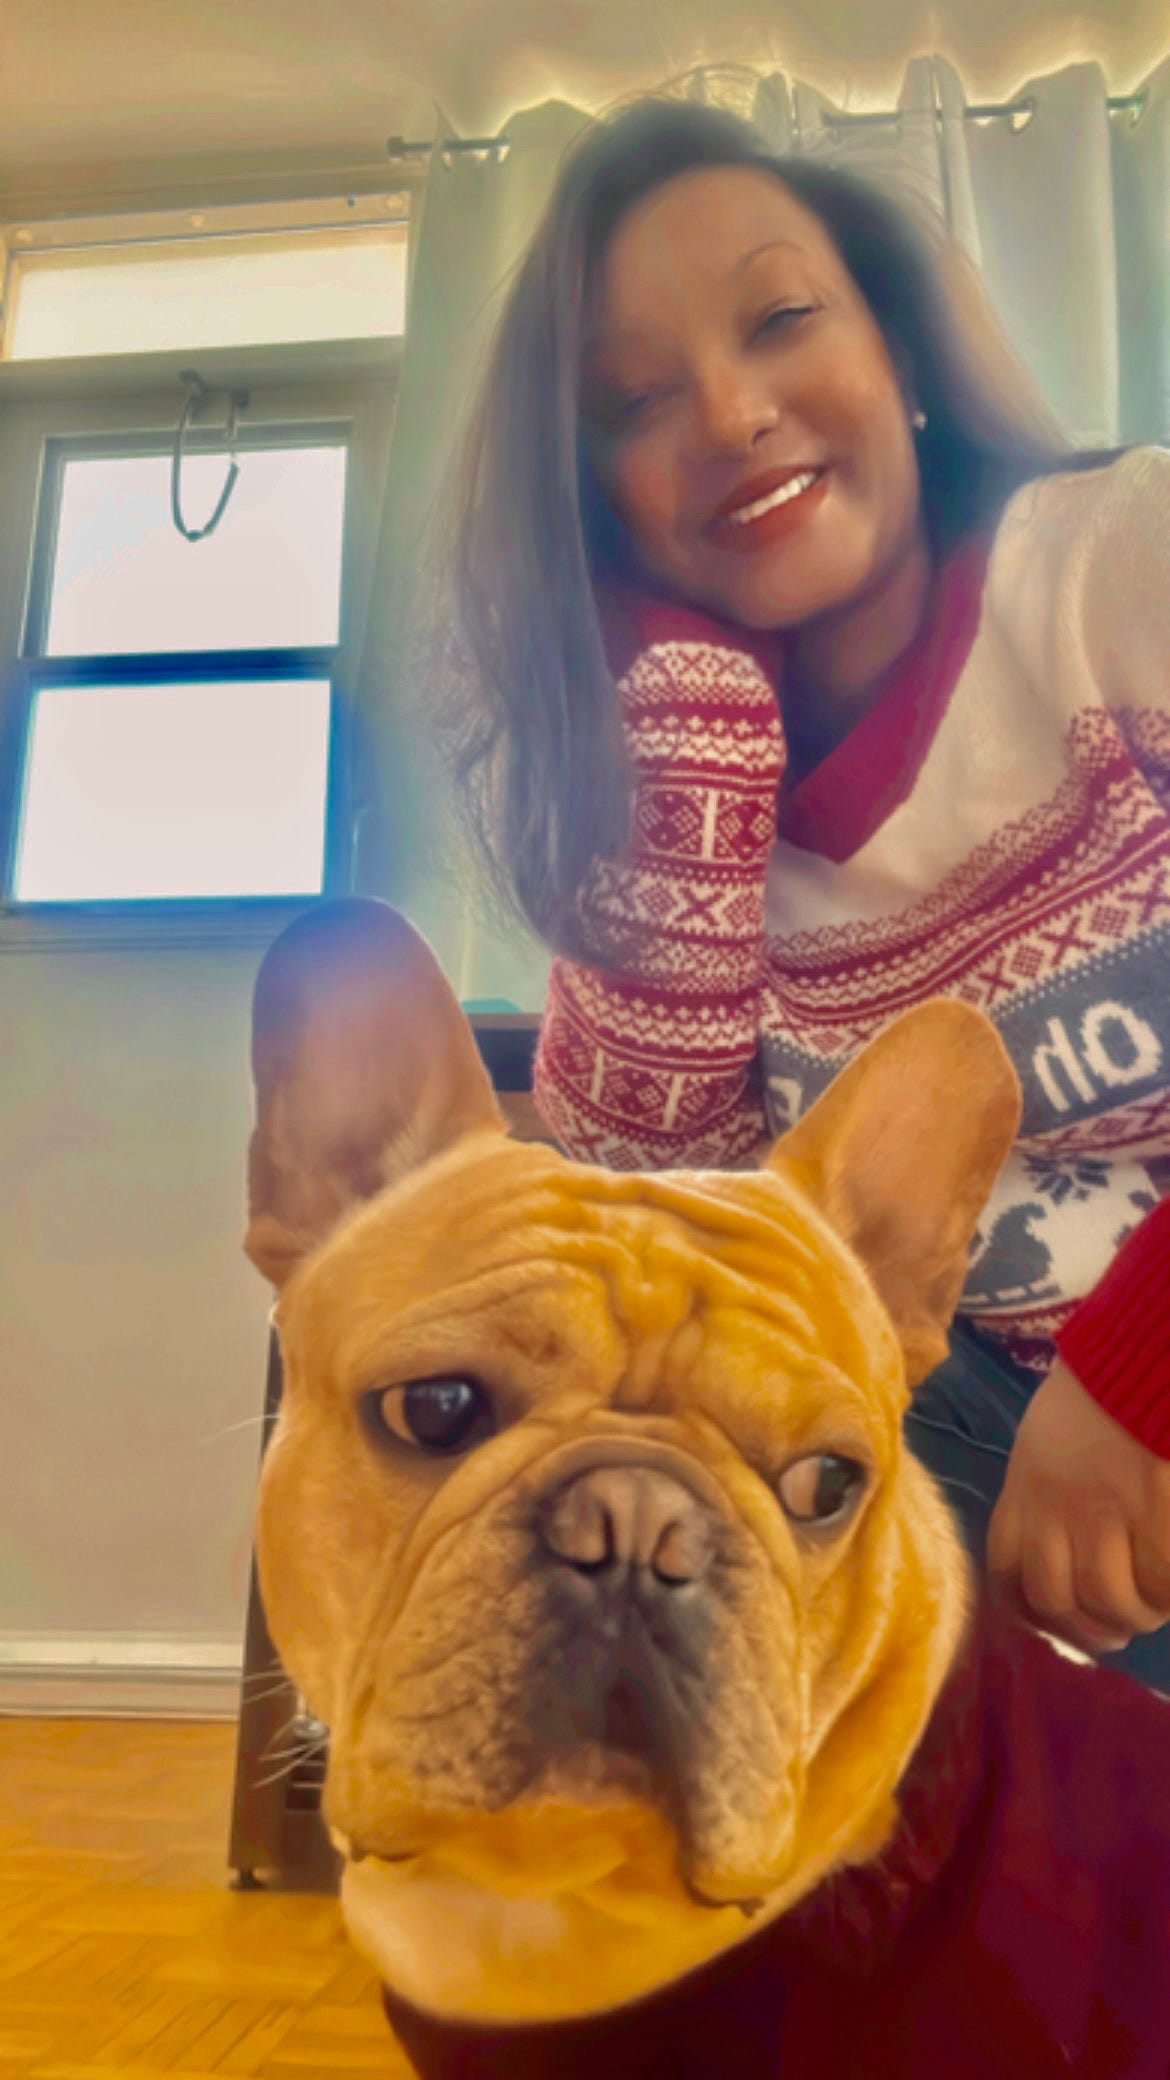 Woman in red sweater with a dog